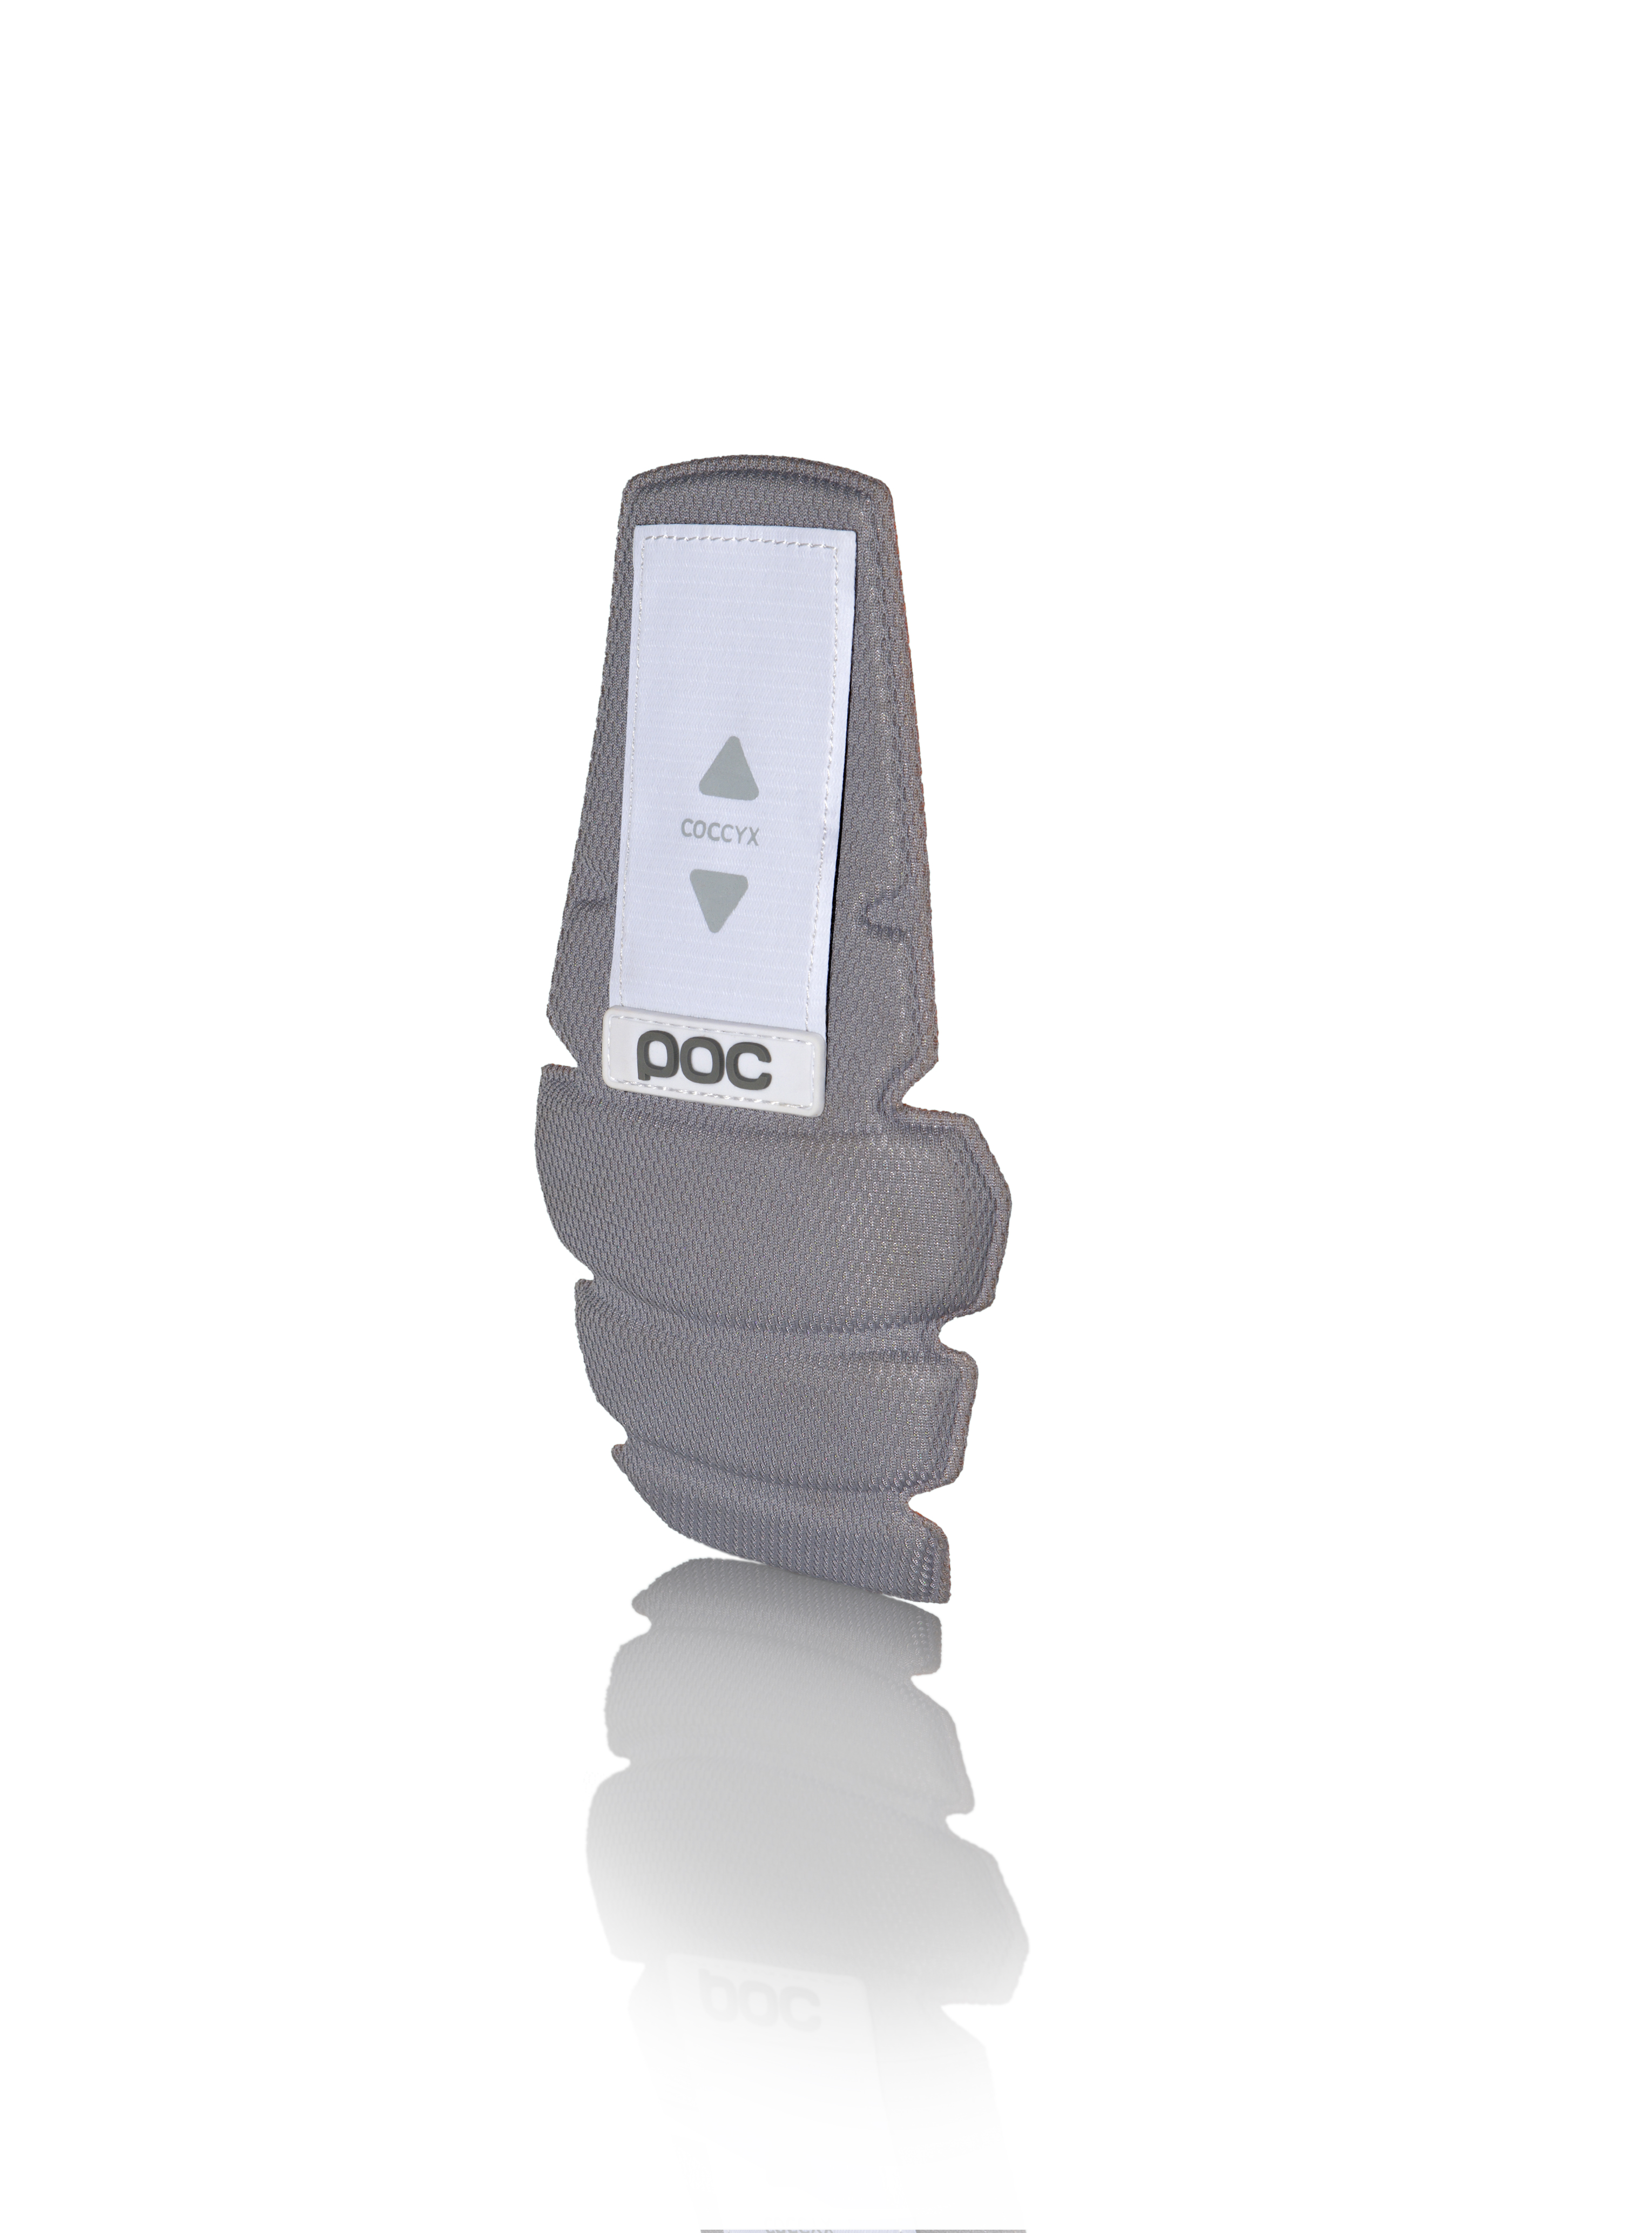 POC coccyx protector that can be added to a POC back protector